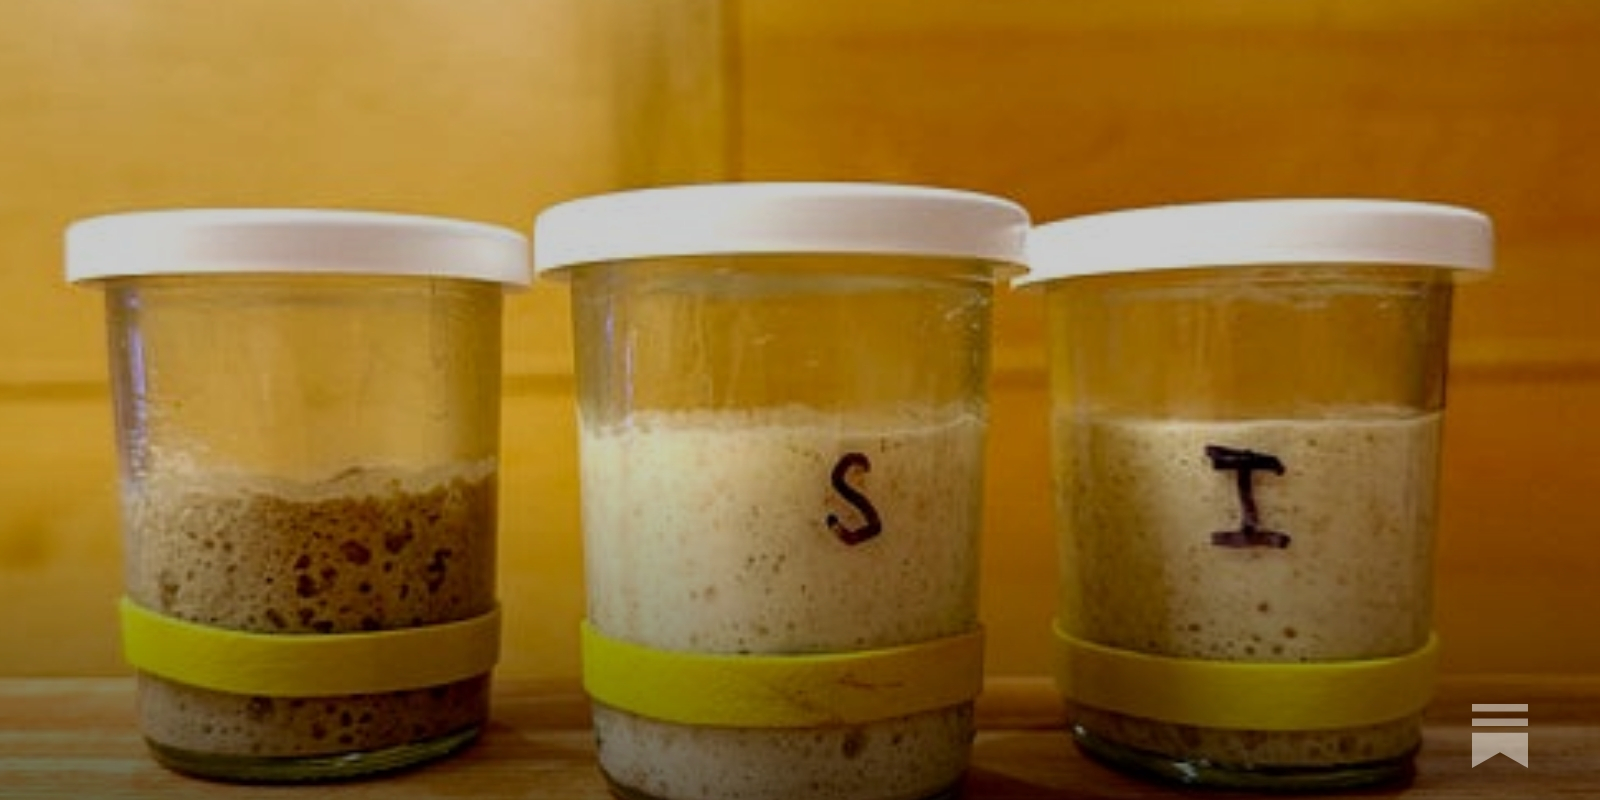 Continuous Sourdough Starter Maintenance Without Friction (or